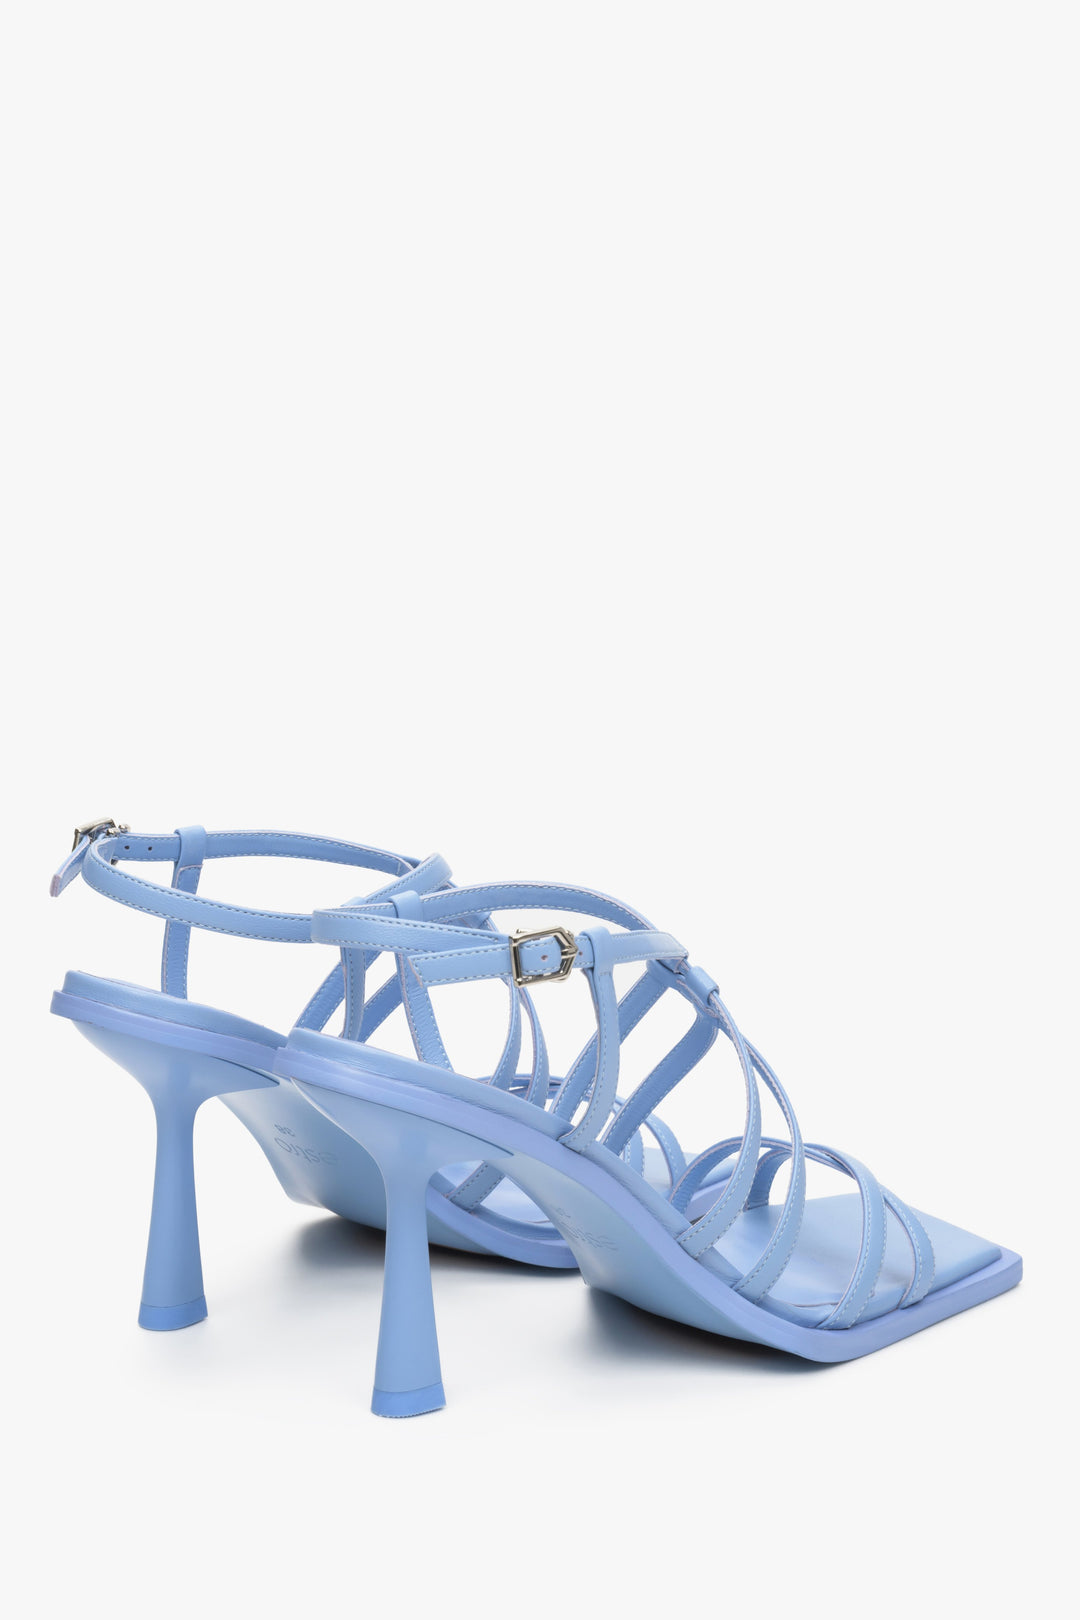 Women's heeled strappy sandals in light blue, Estro brand - a close-up on a funnel heel.